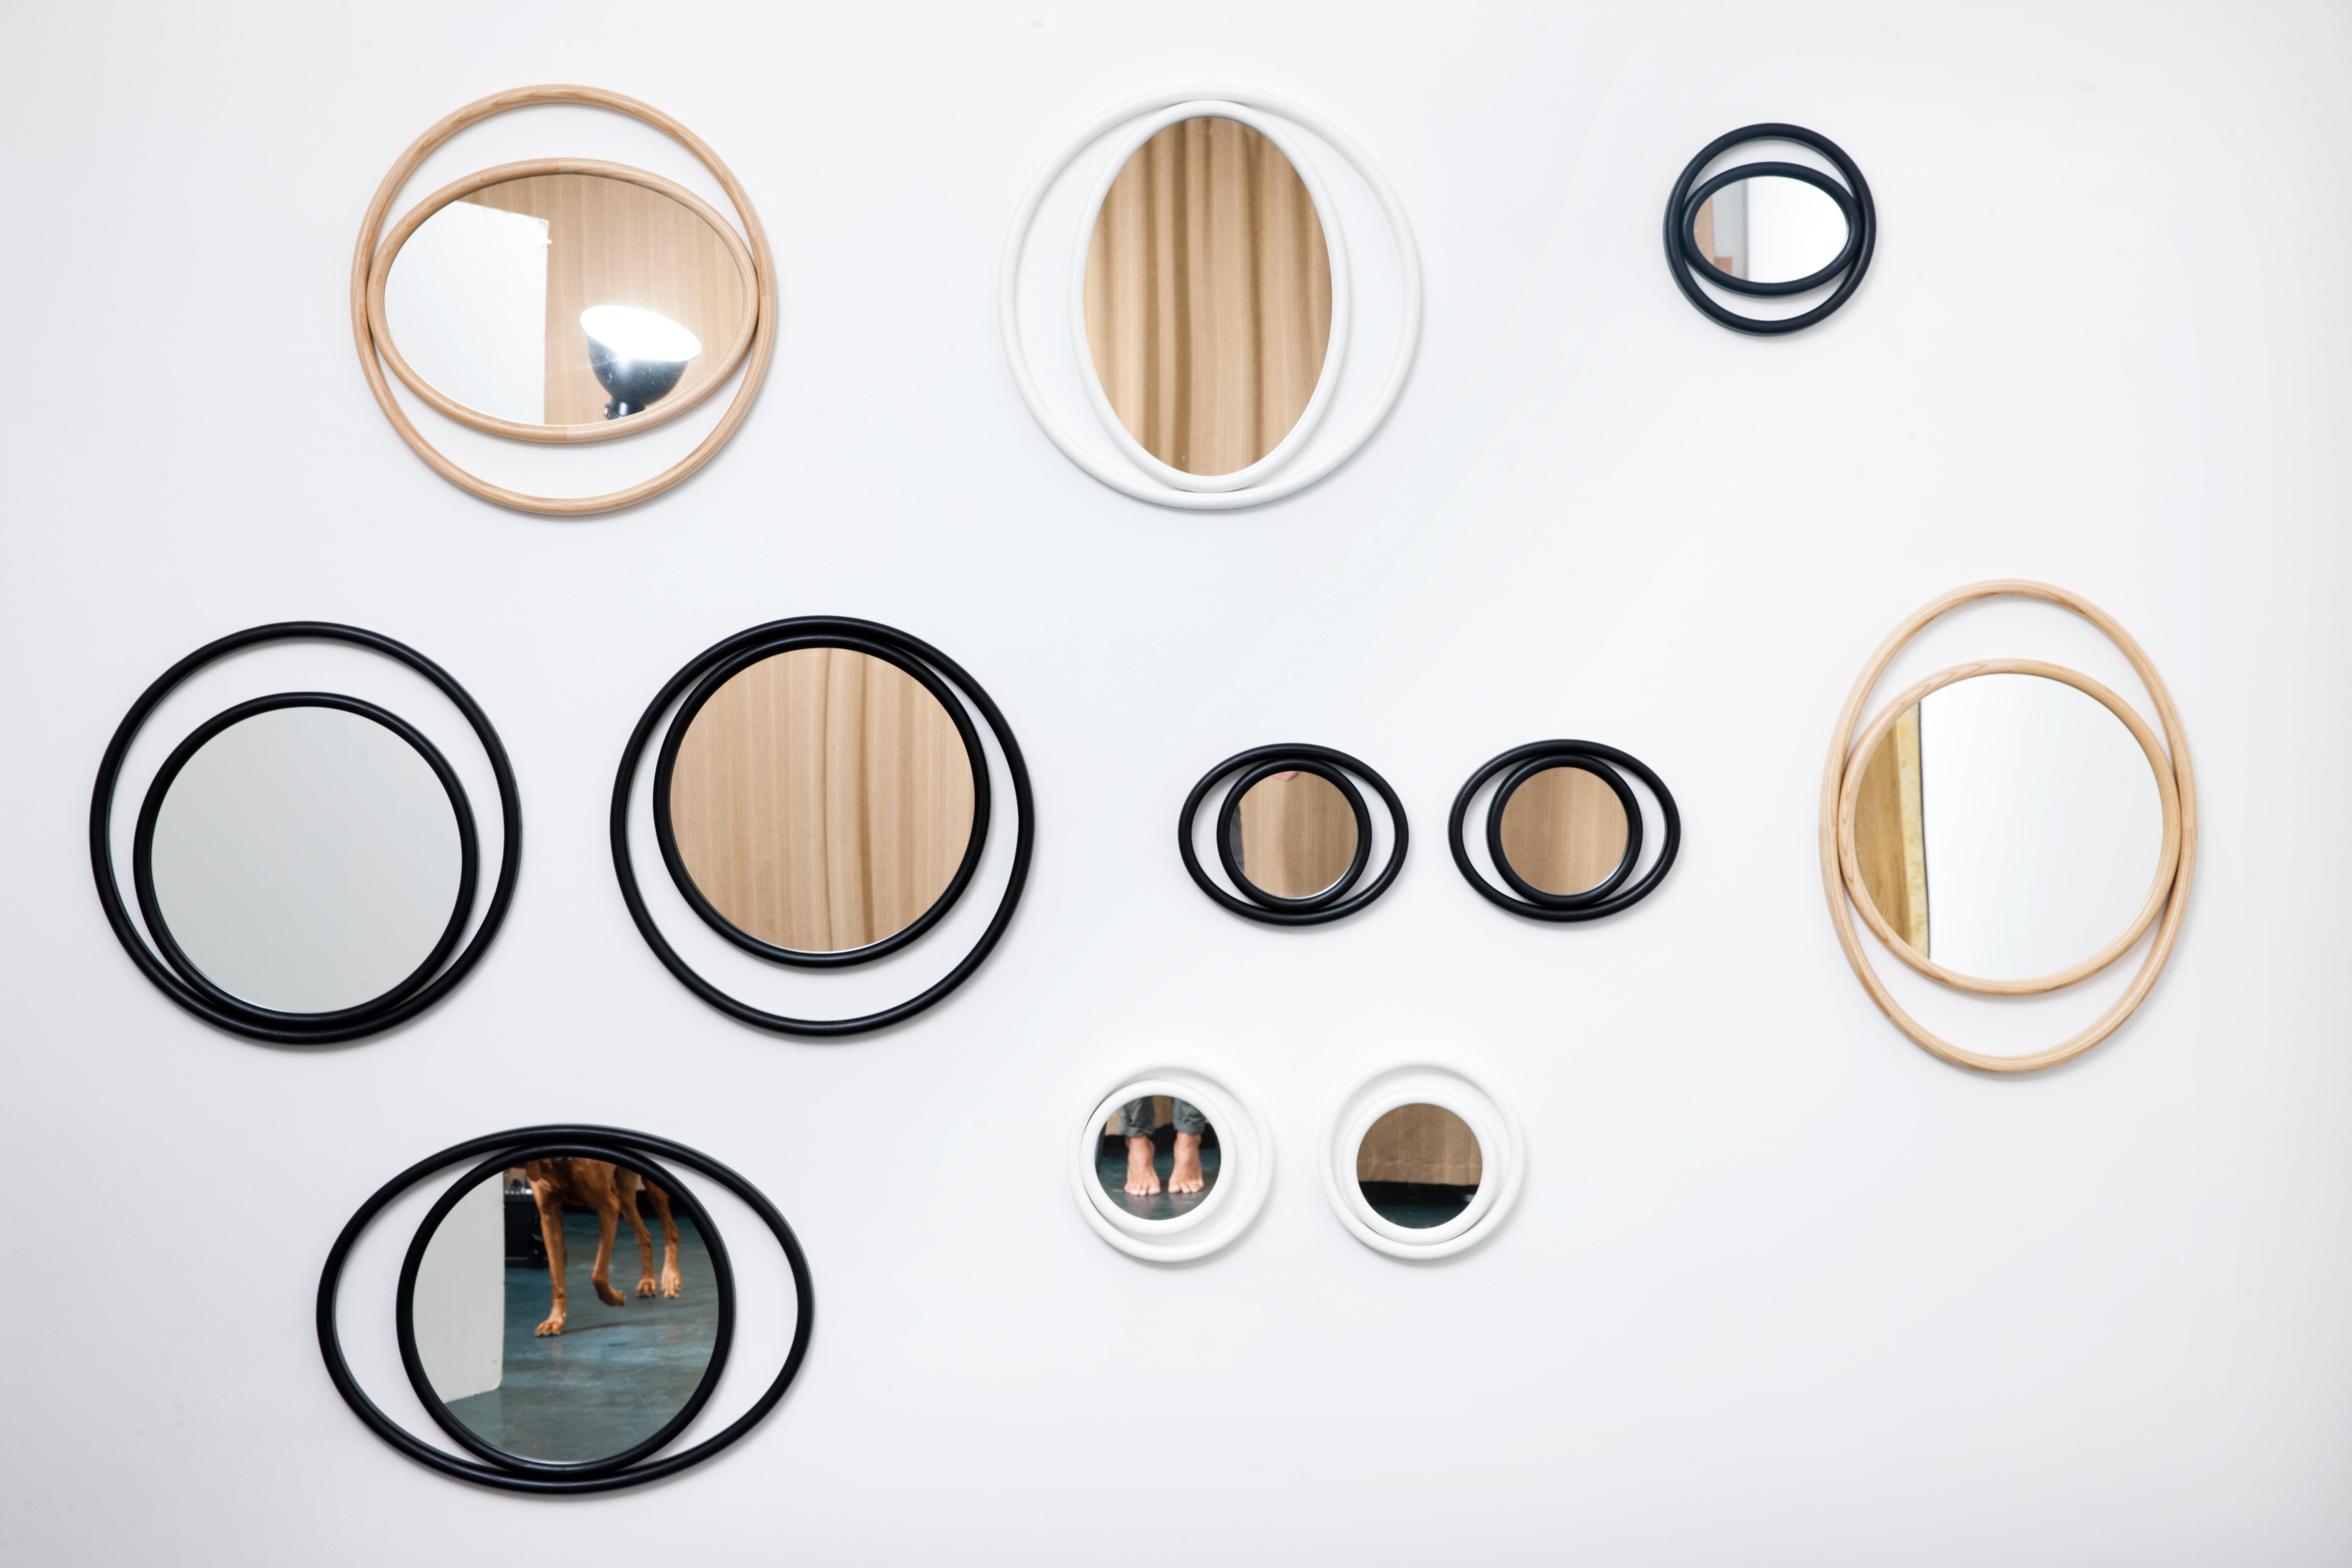 Simple geometric shapes, a combination of circles and ovals, recreate scenic suggestions that bring to mind the mystical powers of the eye and delineate the outline of the EYESHINE mirrors devised by the designer Anki Gneib. The bent ash-wood